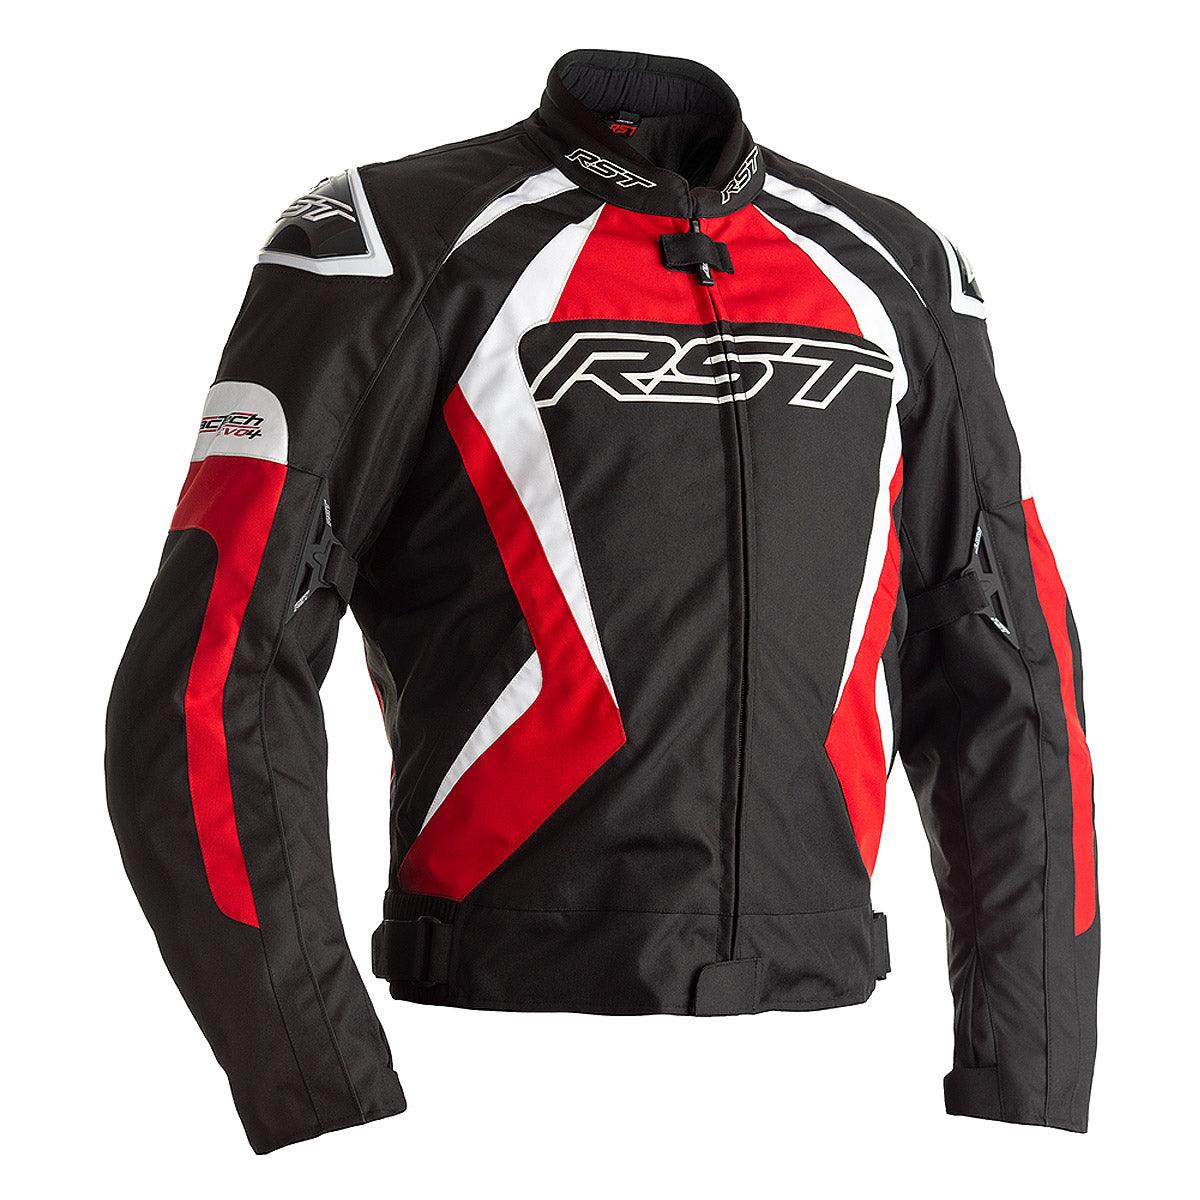 RST Tractech Evo 4 Textile Jacket CE WP Black Red 3XL UK50